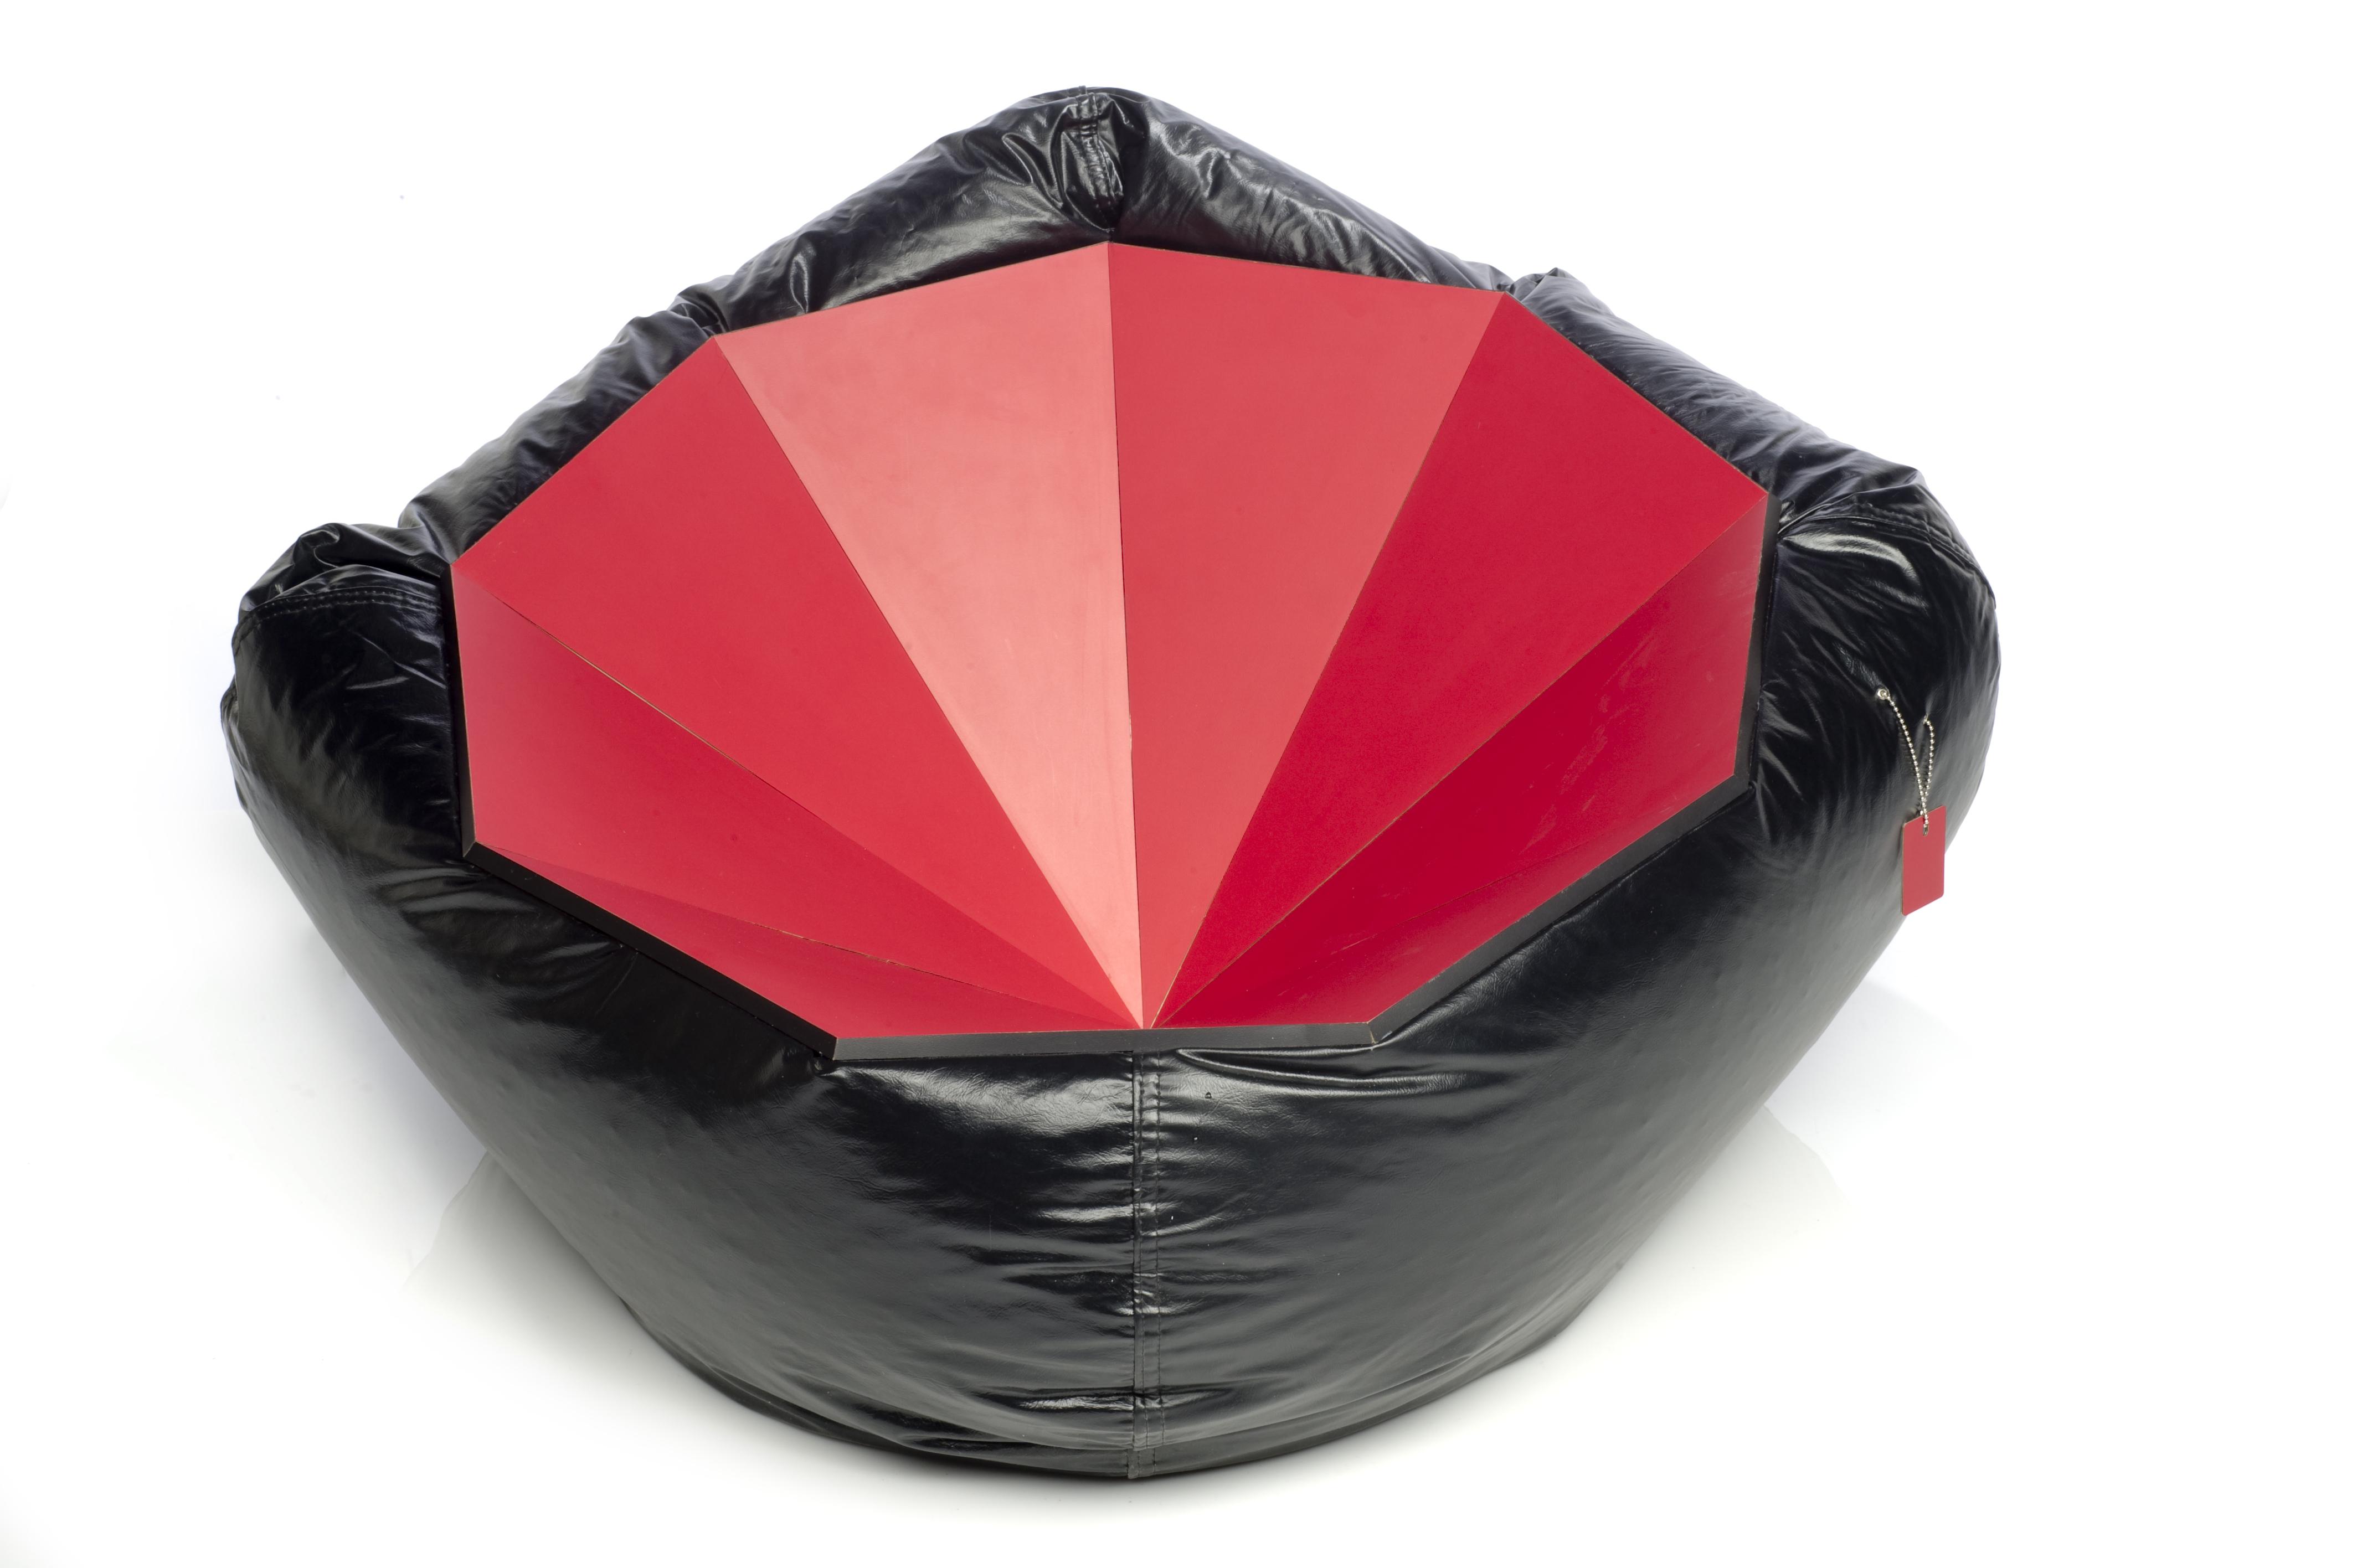 A red and black beanbag chair.